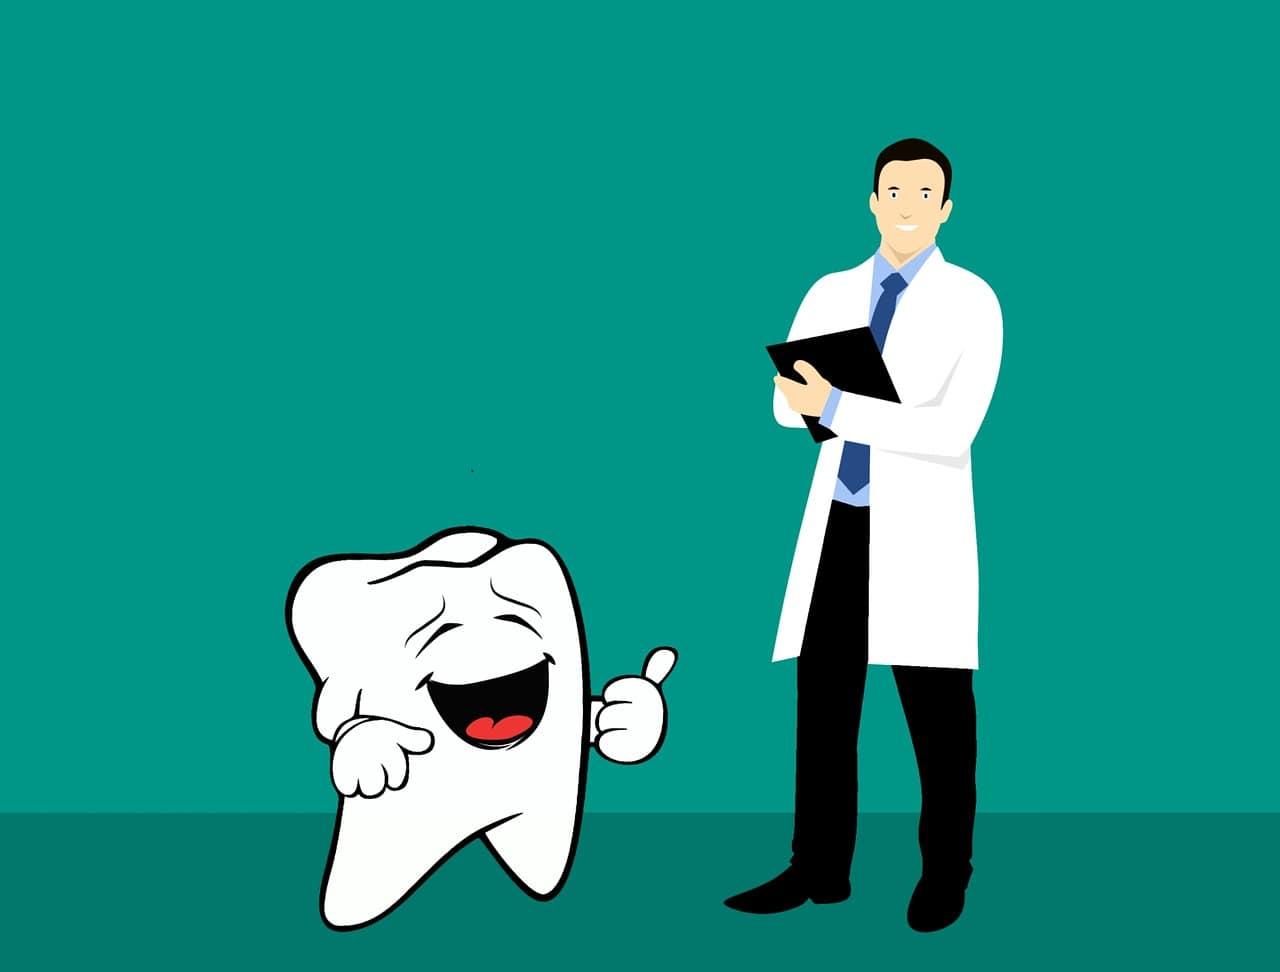 Cartoon Image of a Tooth and Dentist 